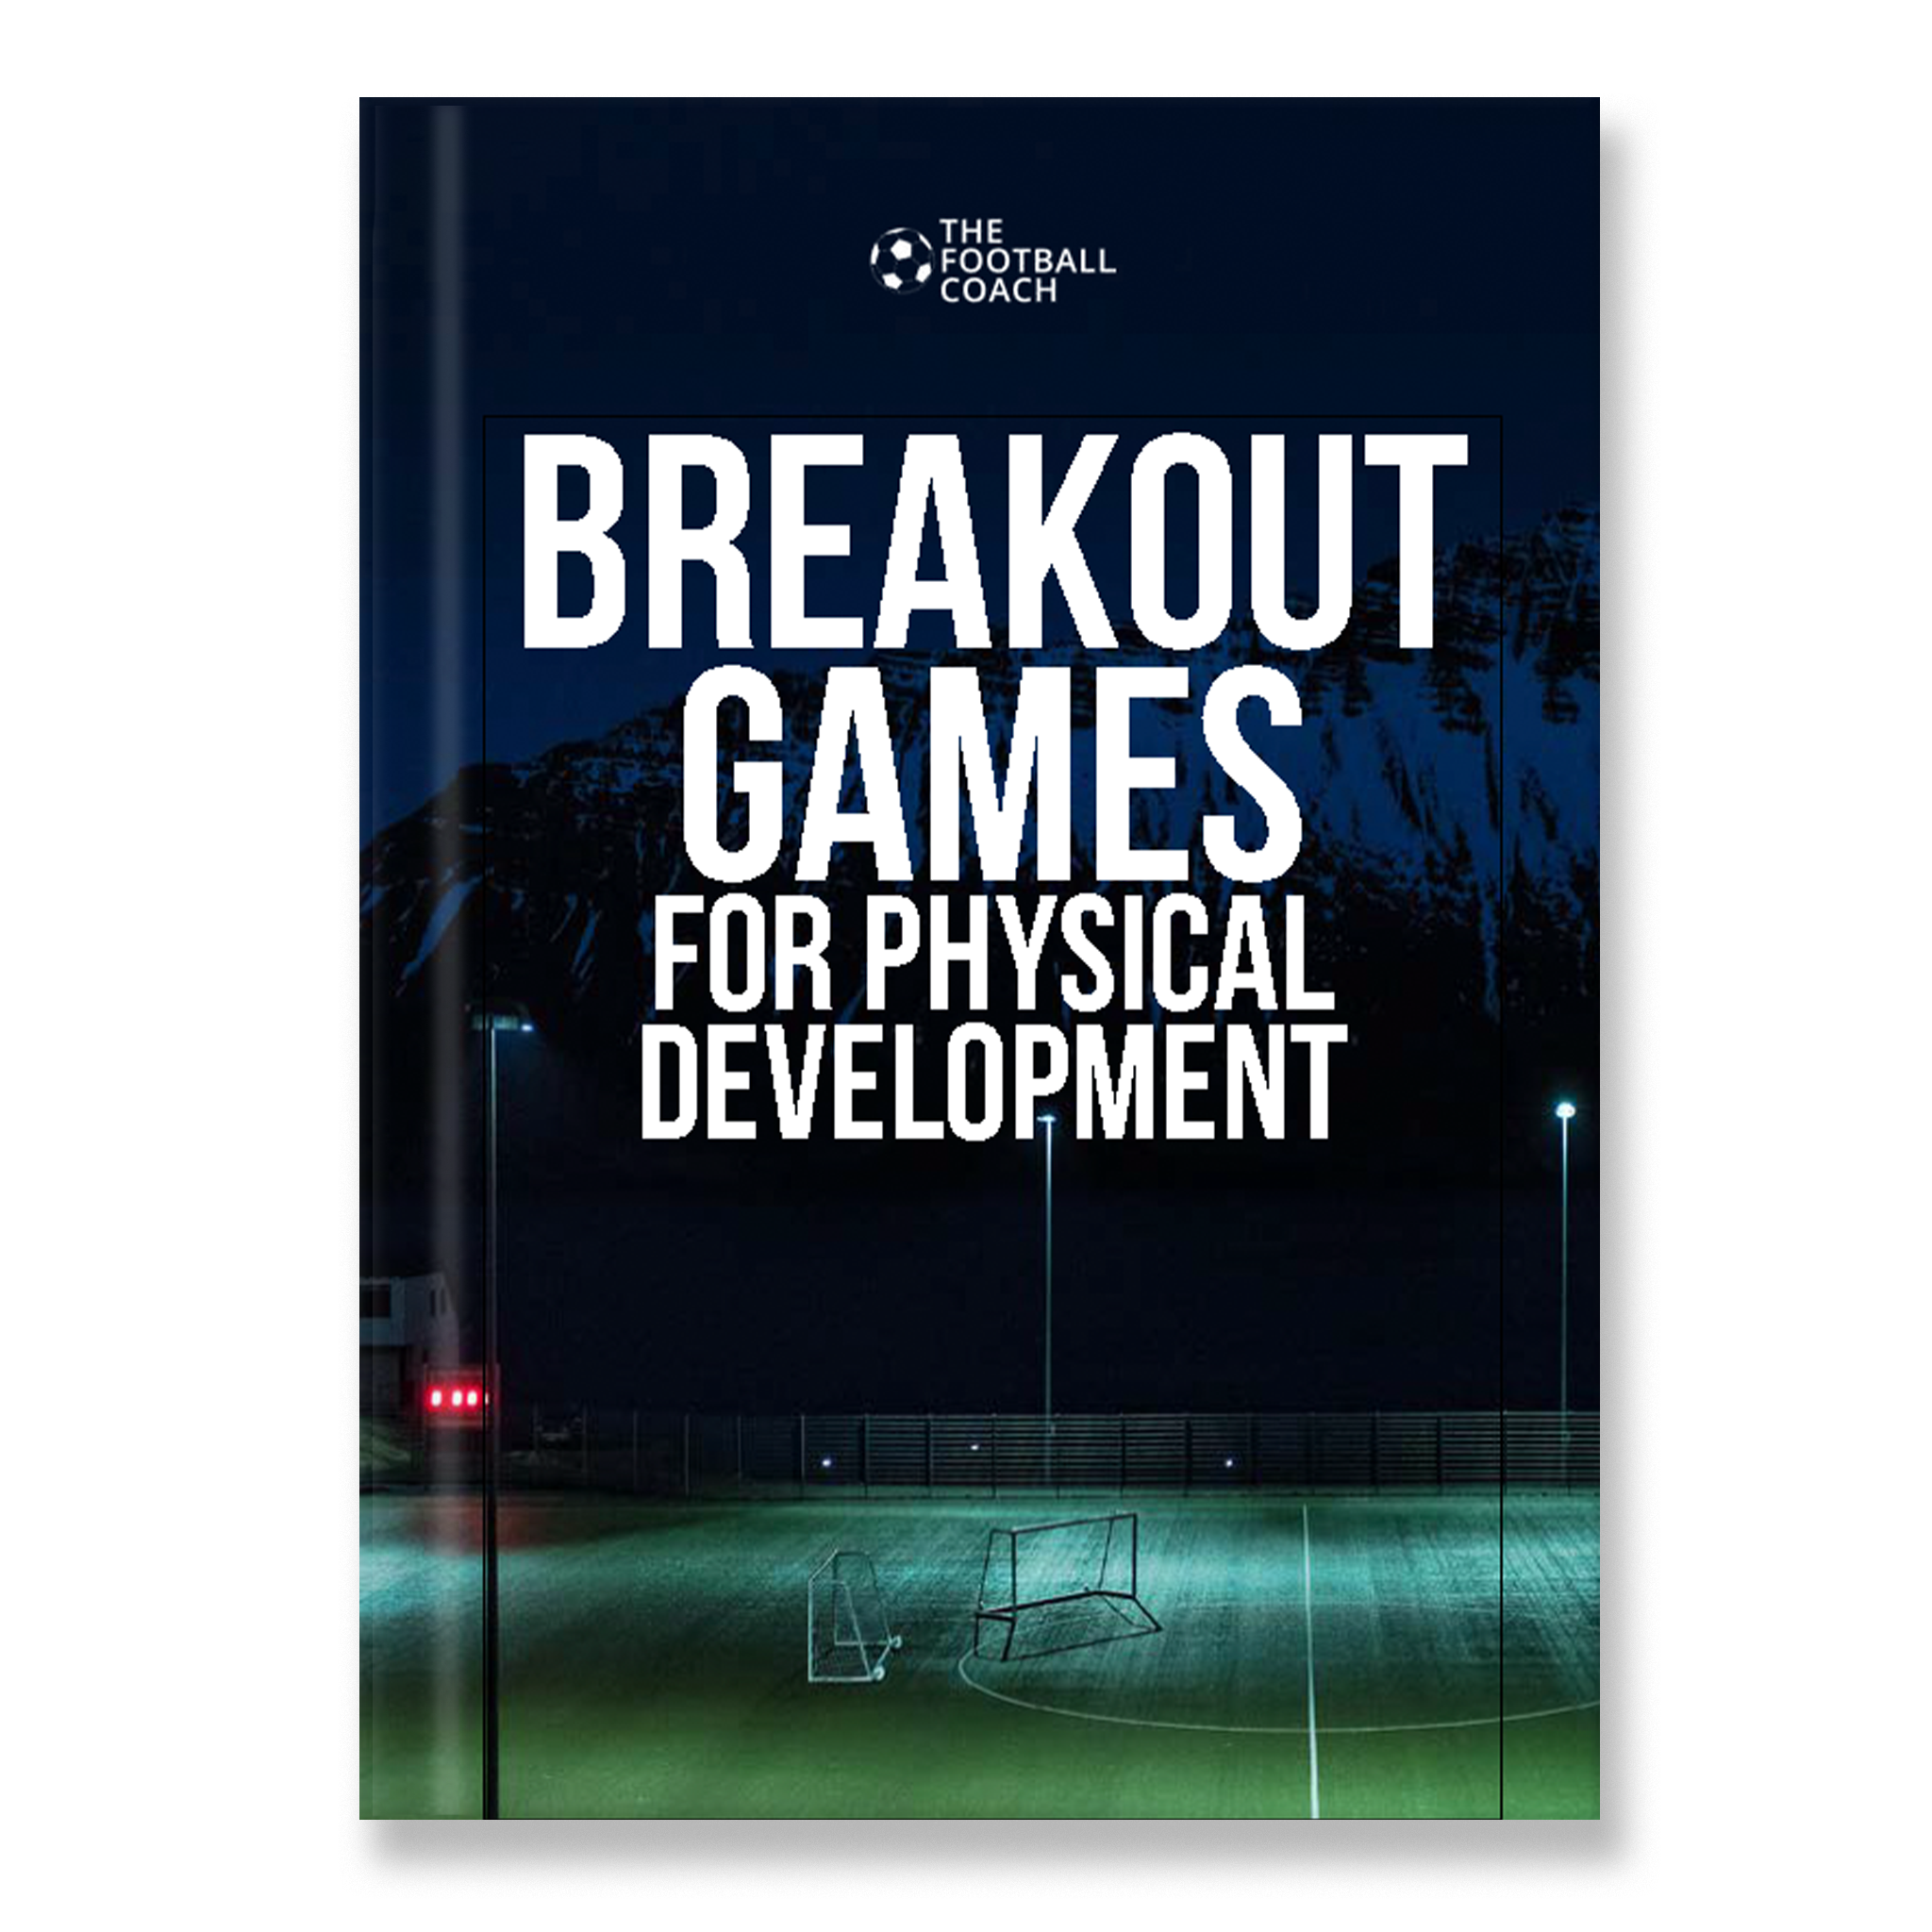 Breakout-Games for Physical Development